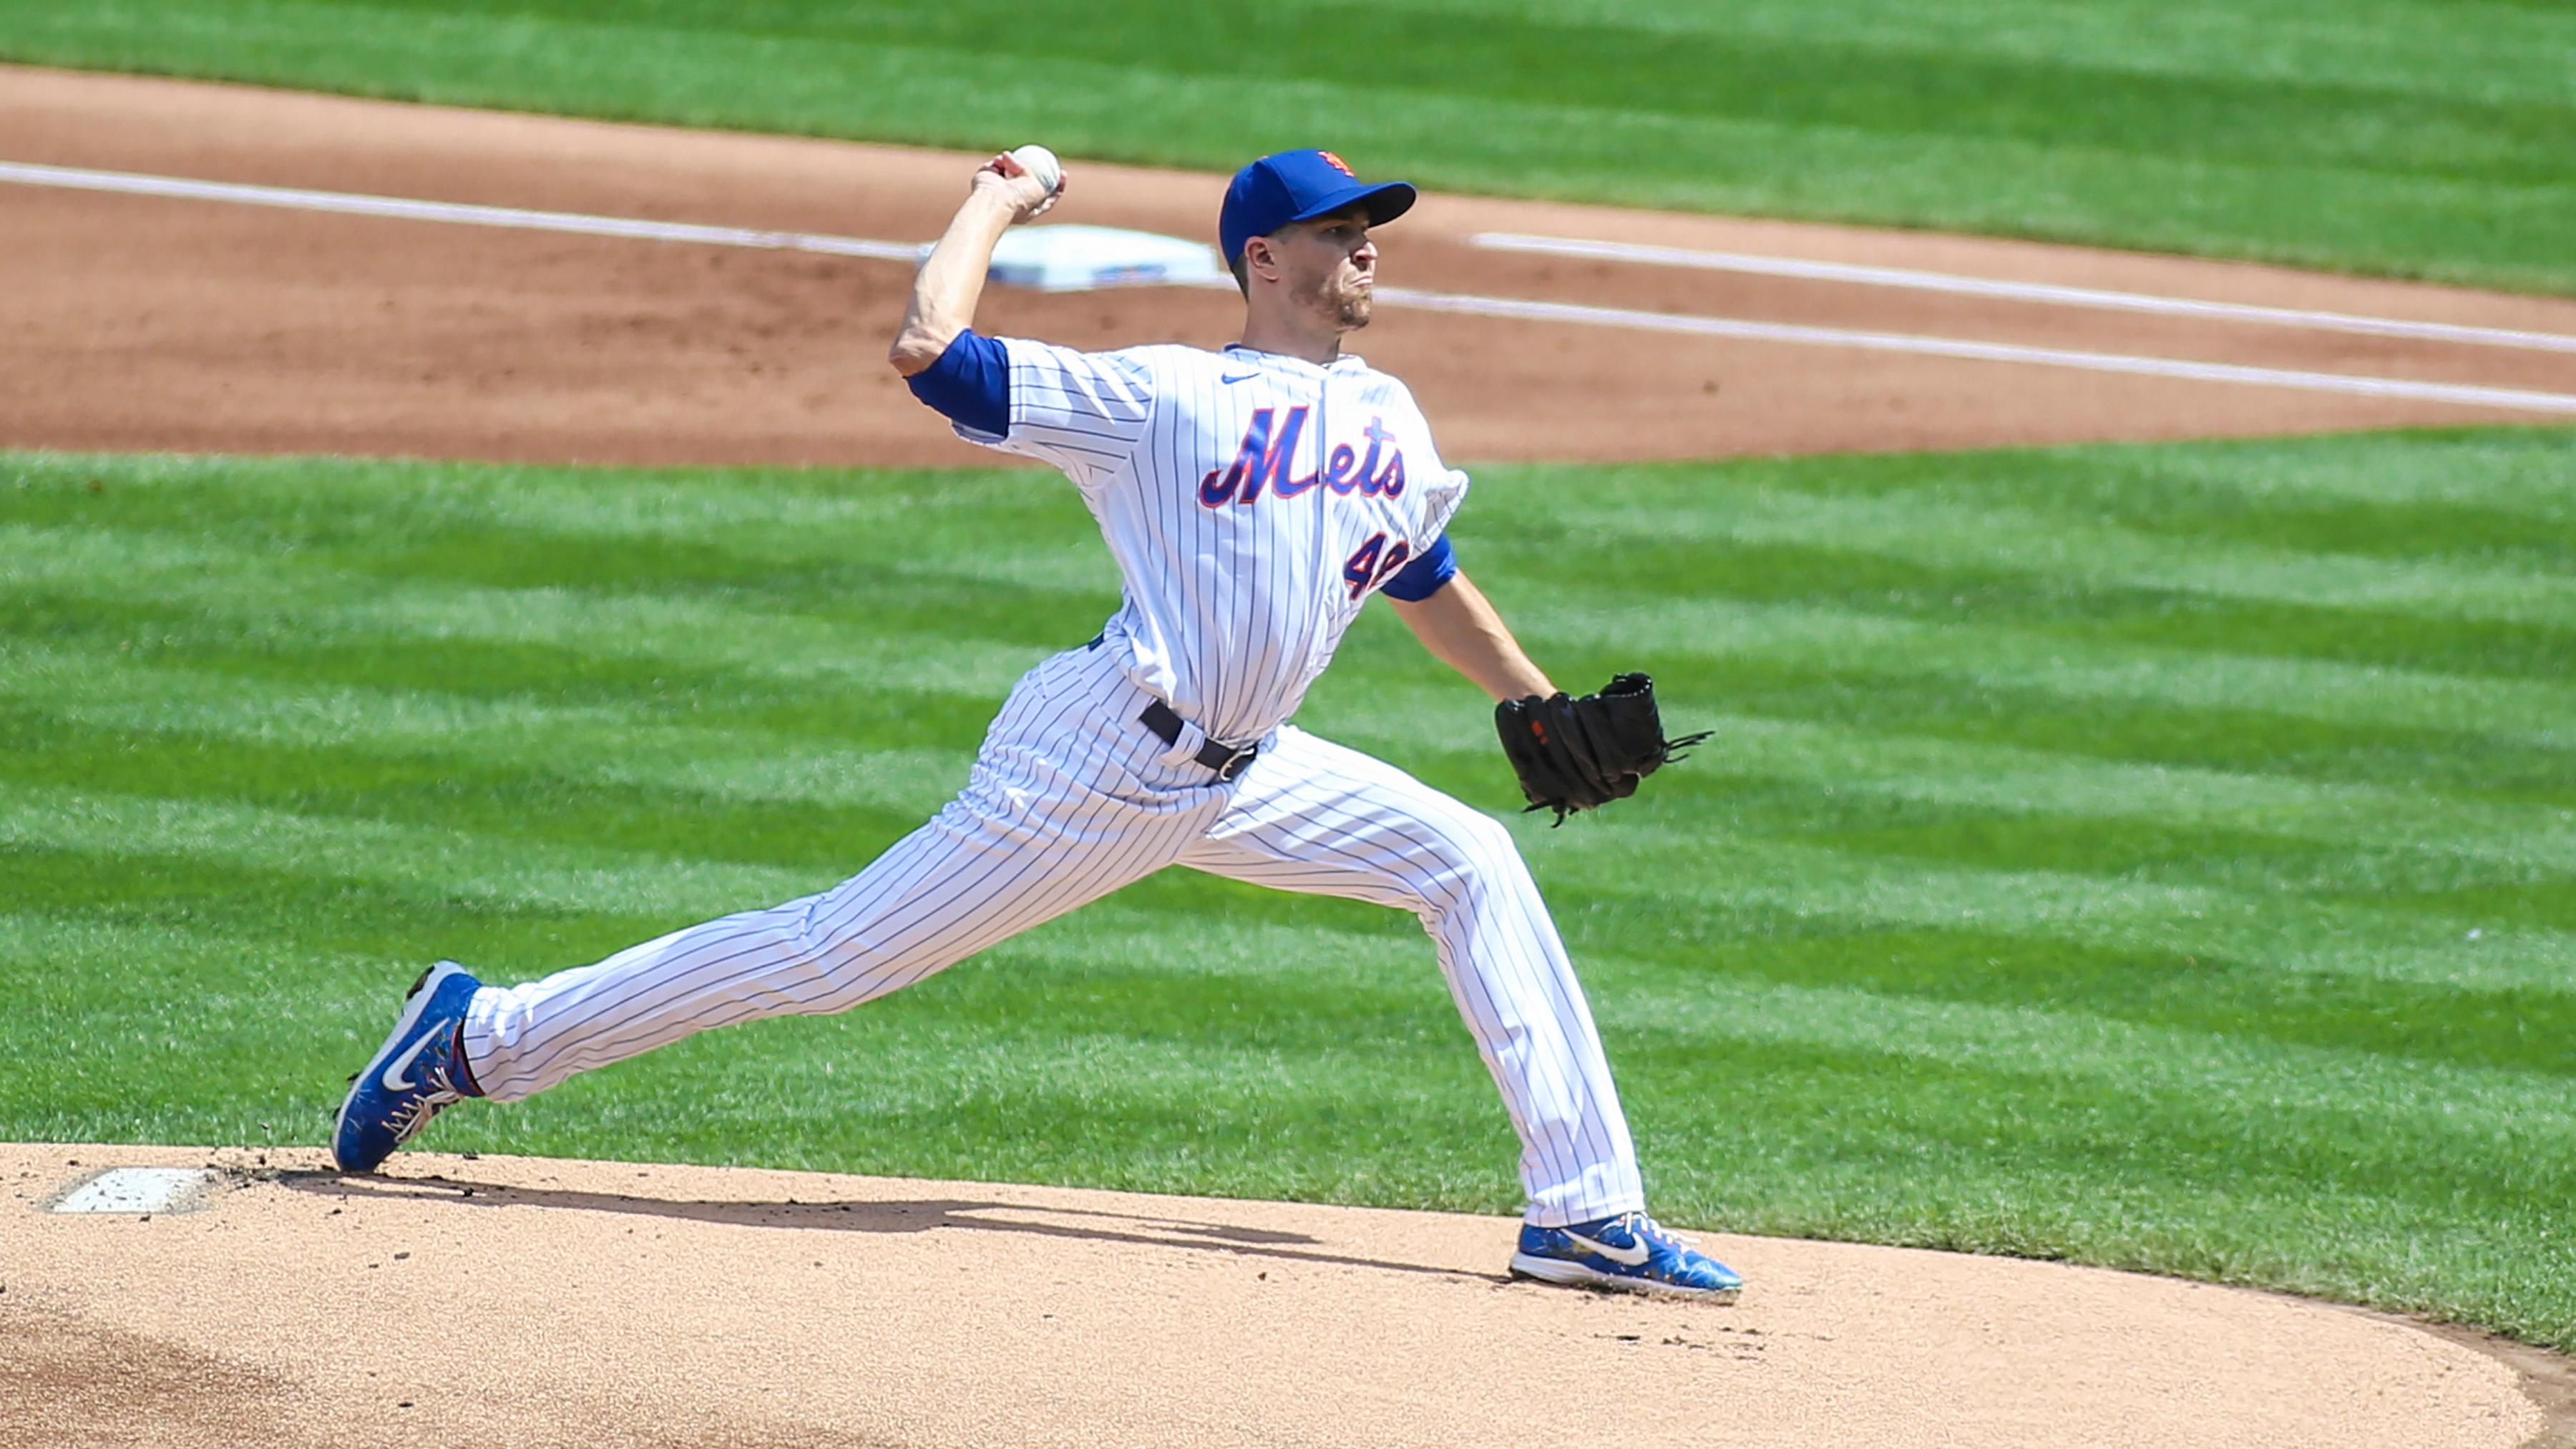 Jacob deGrom delivers a pitch to home plate / USA TODAY